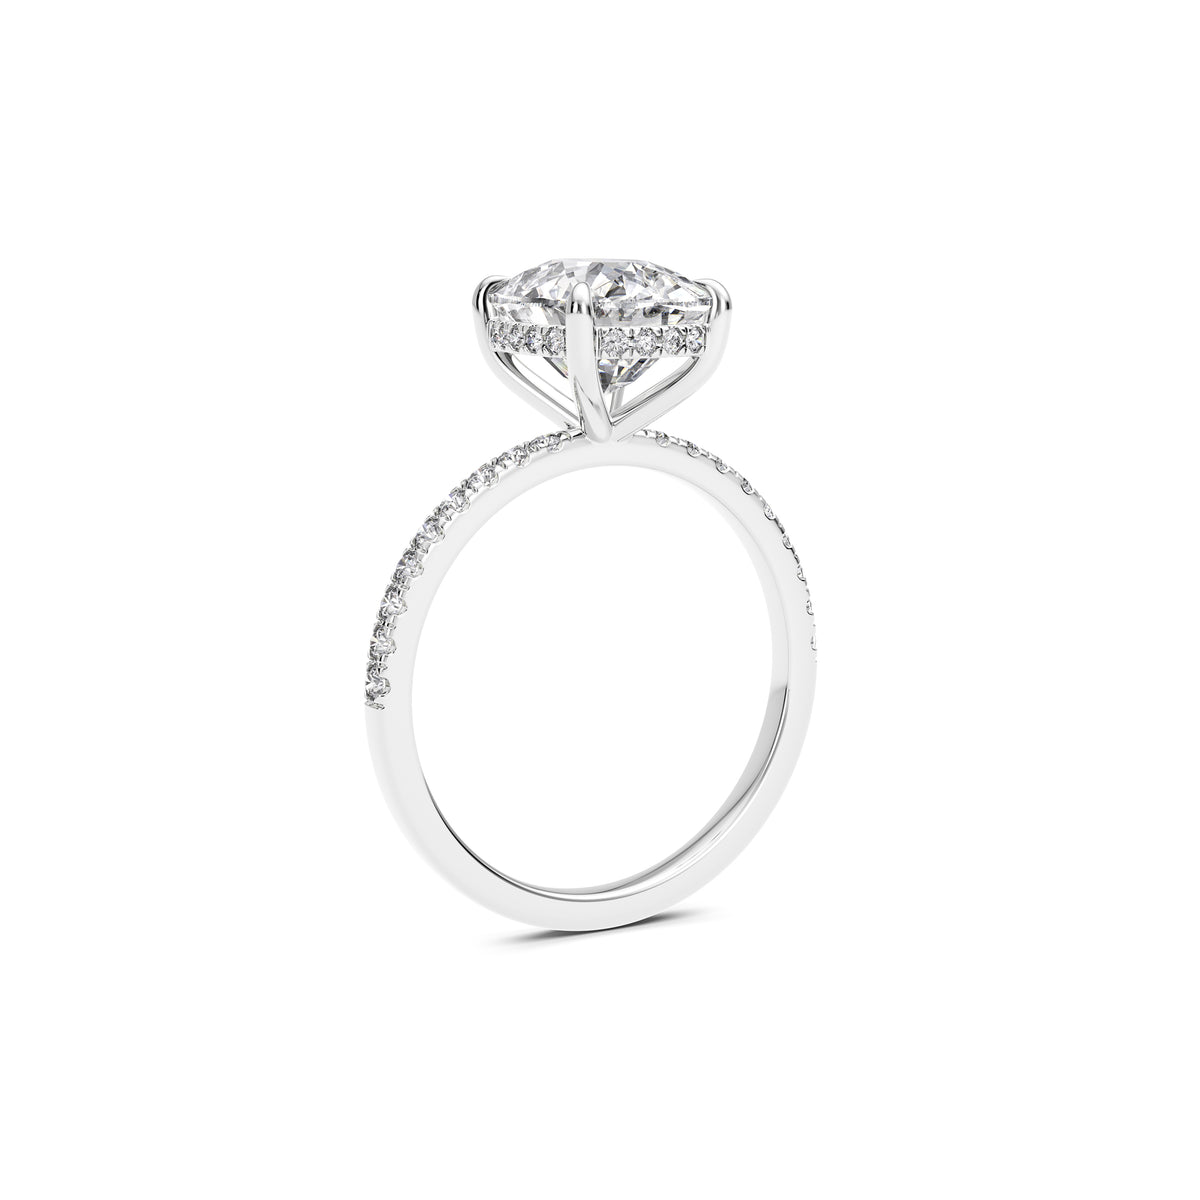 3.02ct Natural Cushion Diamond on a Solitaire